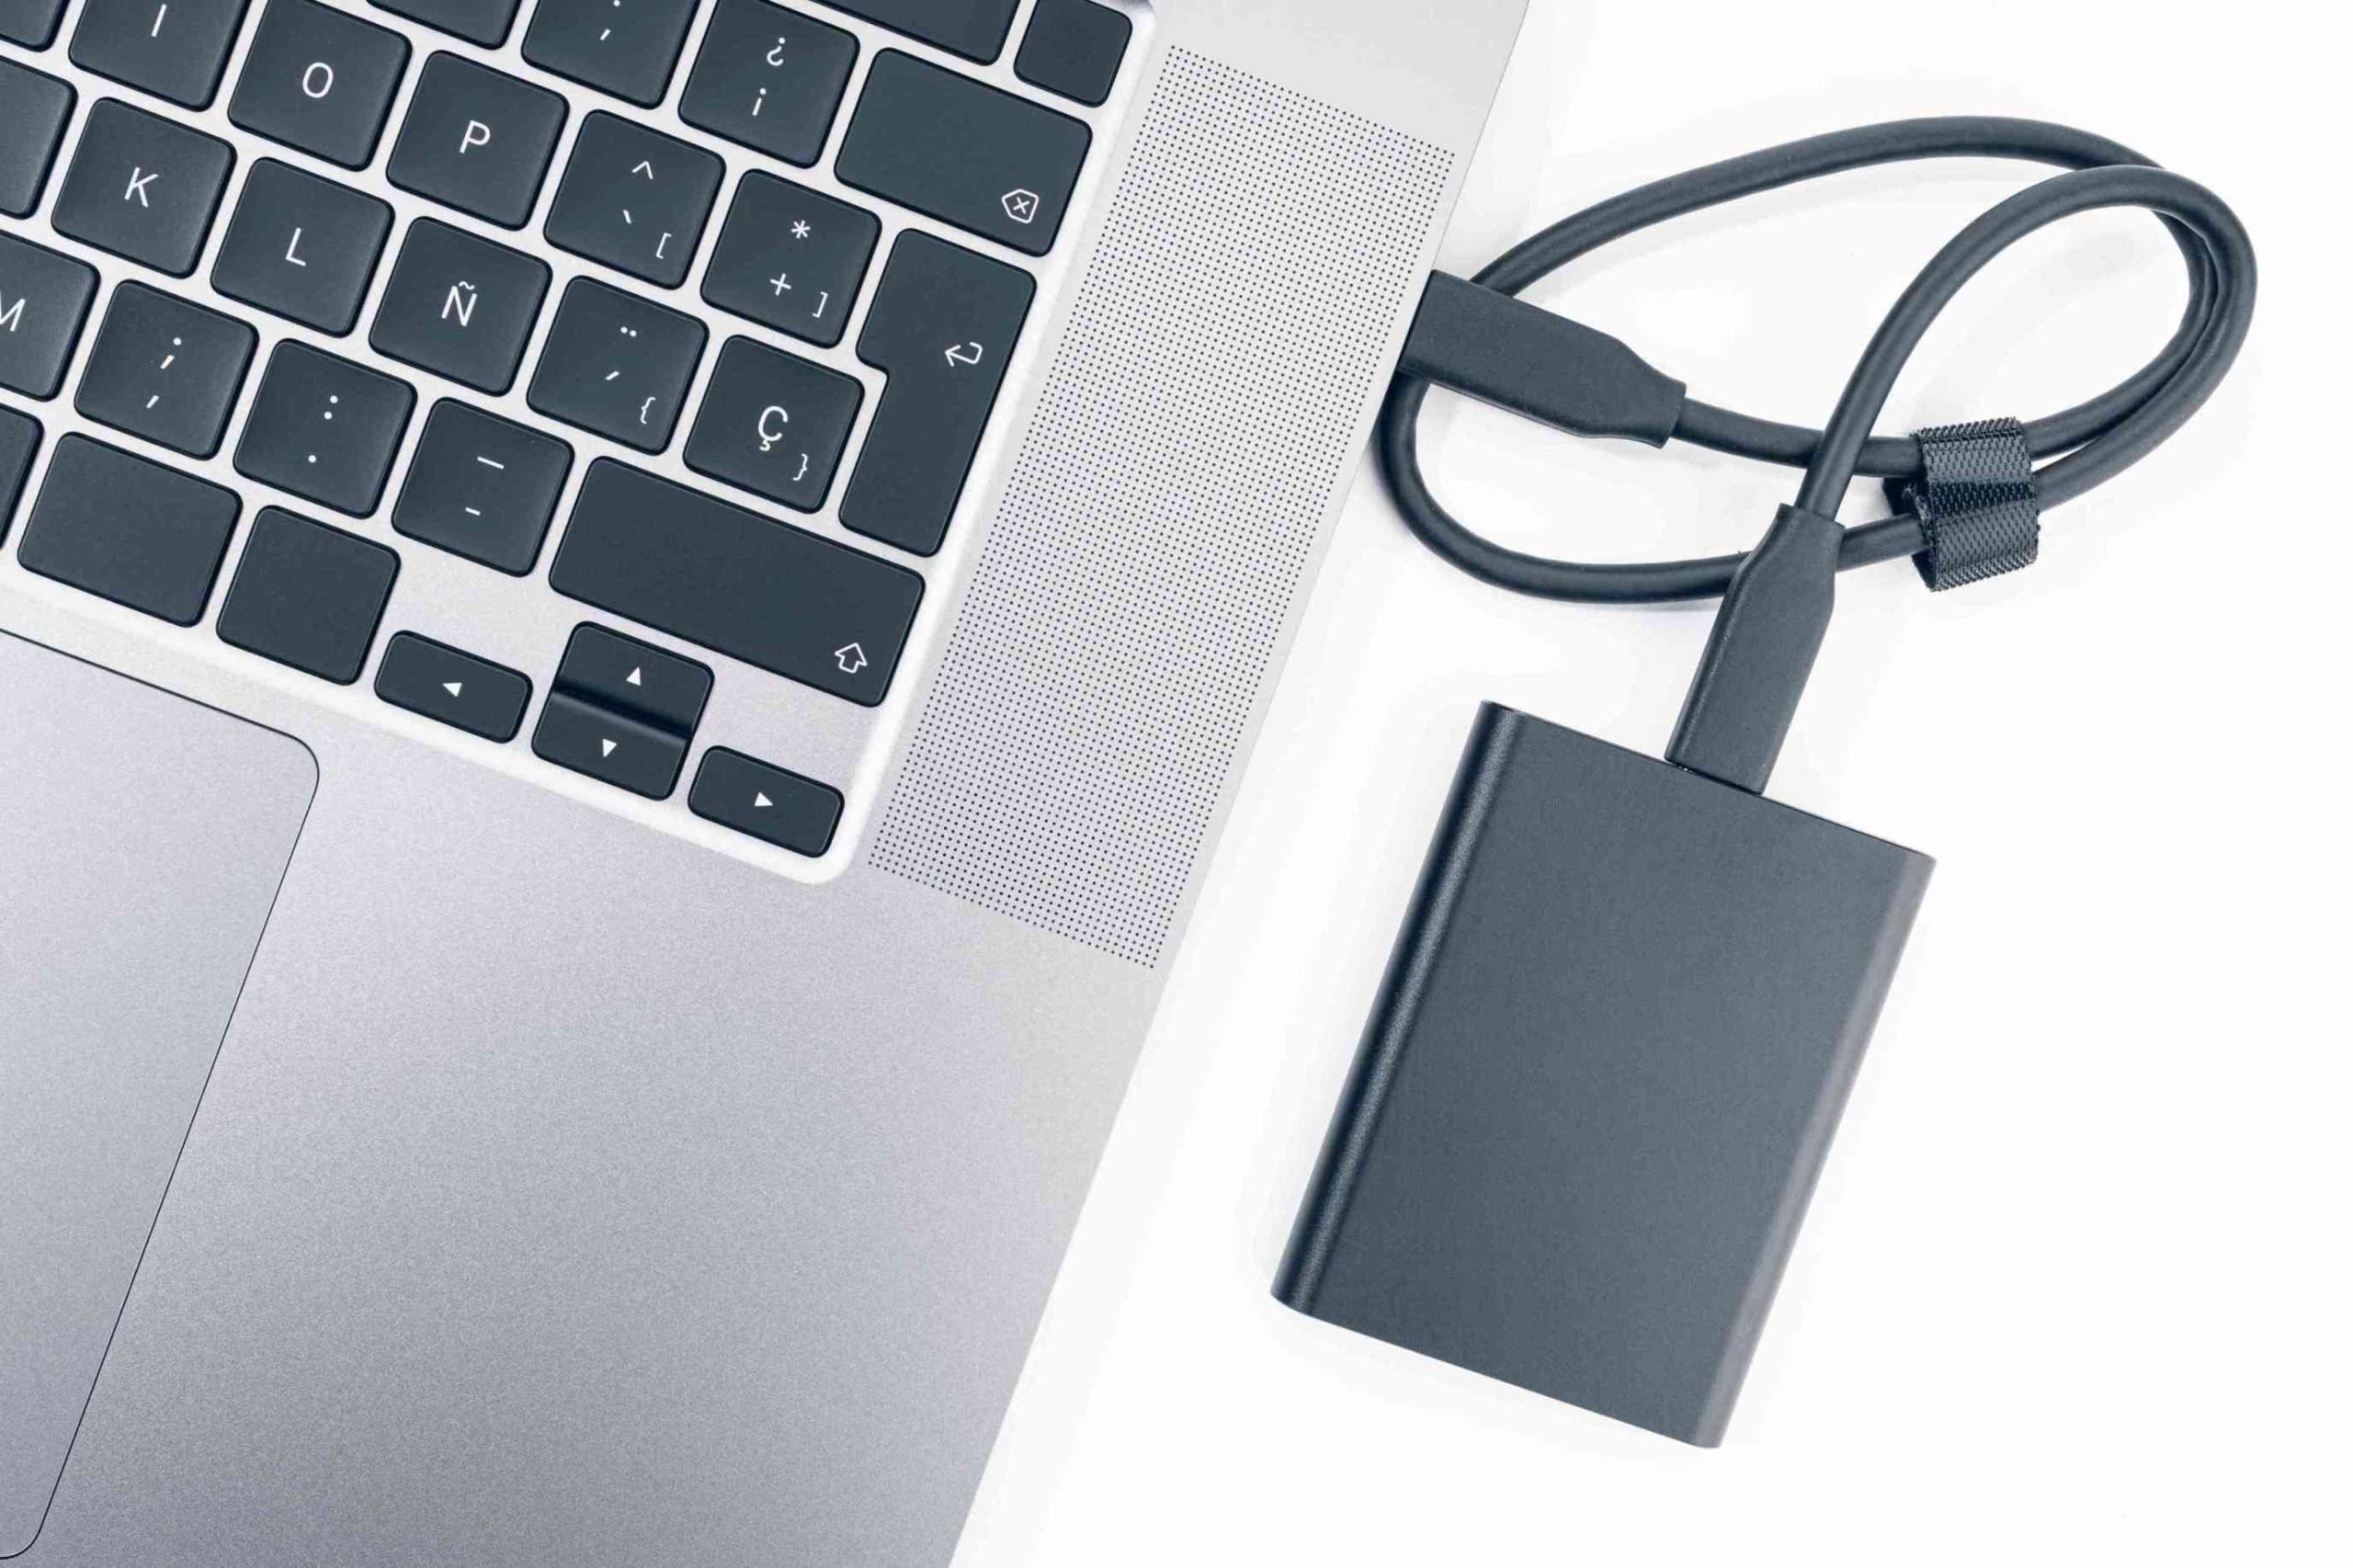 External Hard Drive Not Showing up on Mac Disk Utility: Troubleshooting Guide